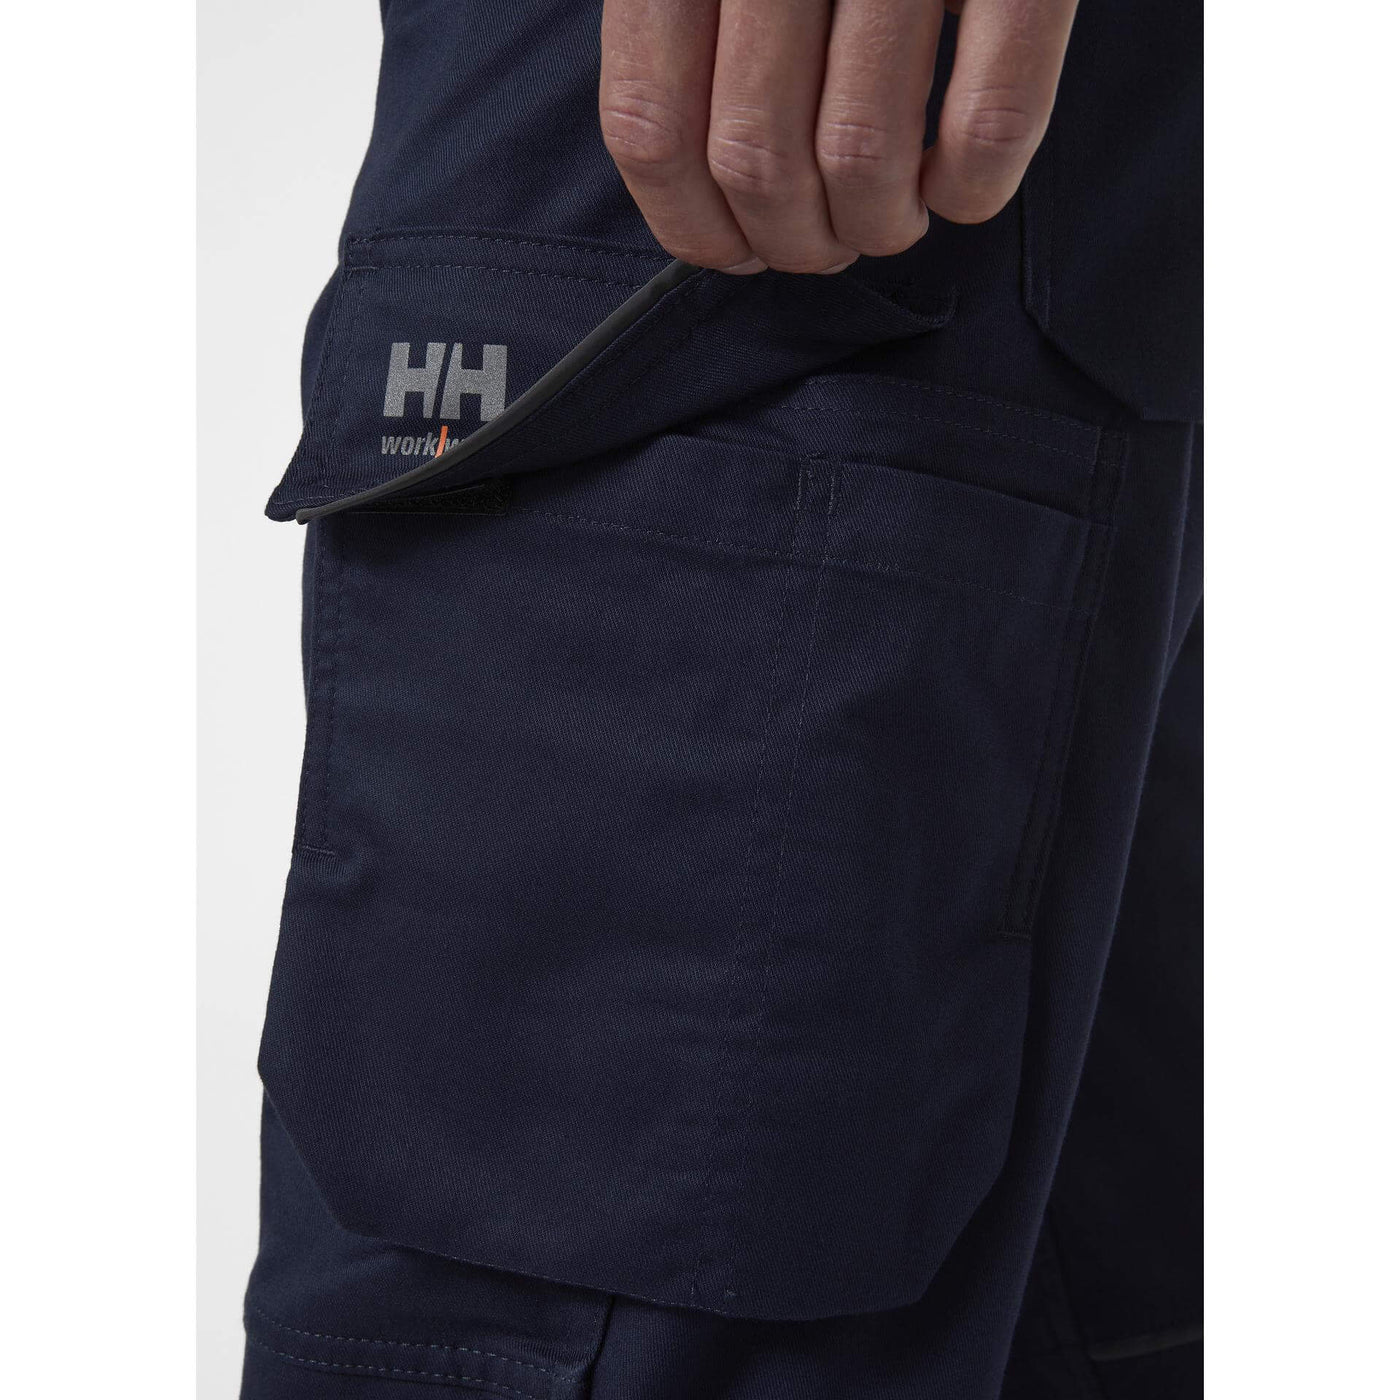 Helly Hansen Manchester Stretch Work Trousers Navy 6 Feature 2#colour_navy